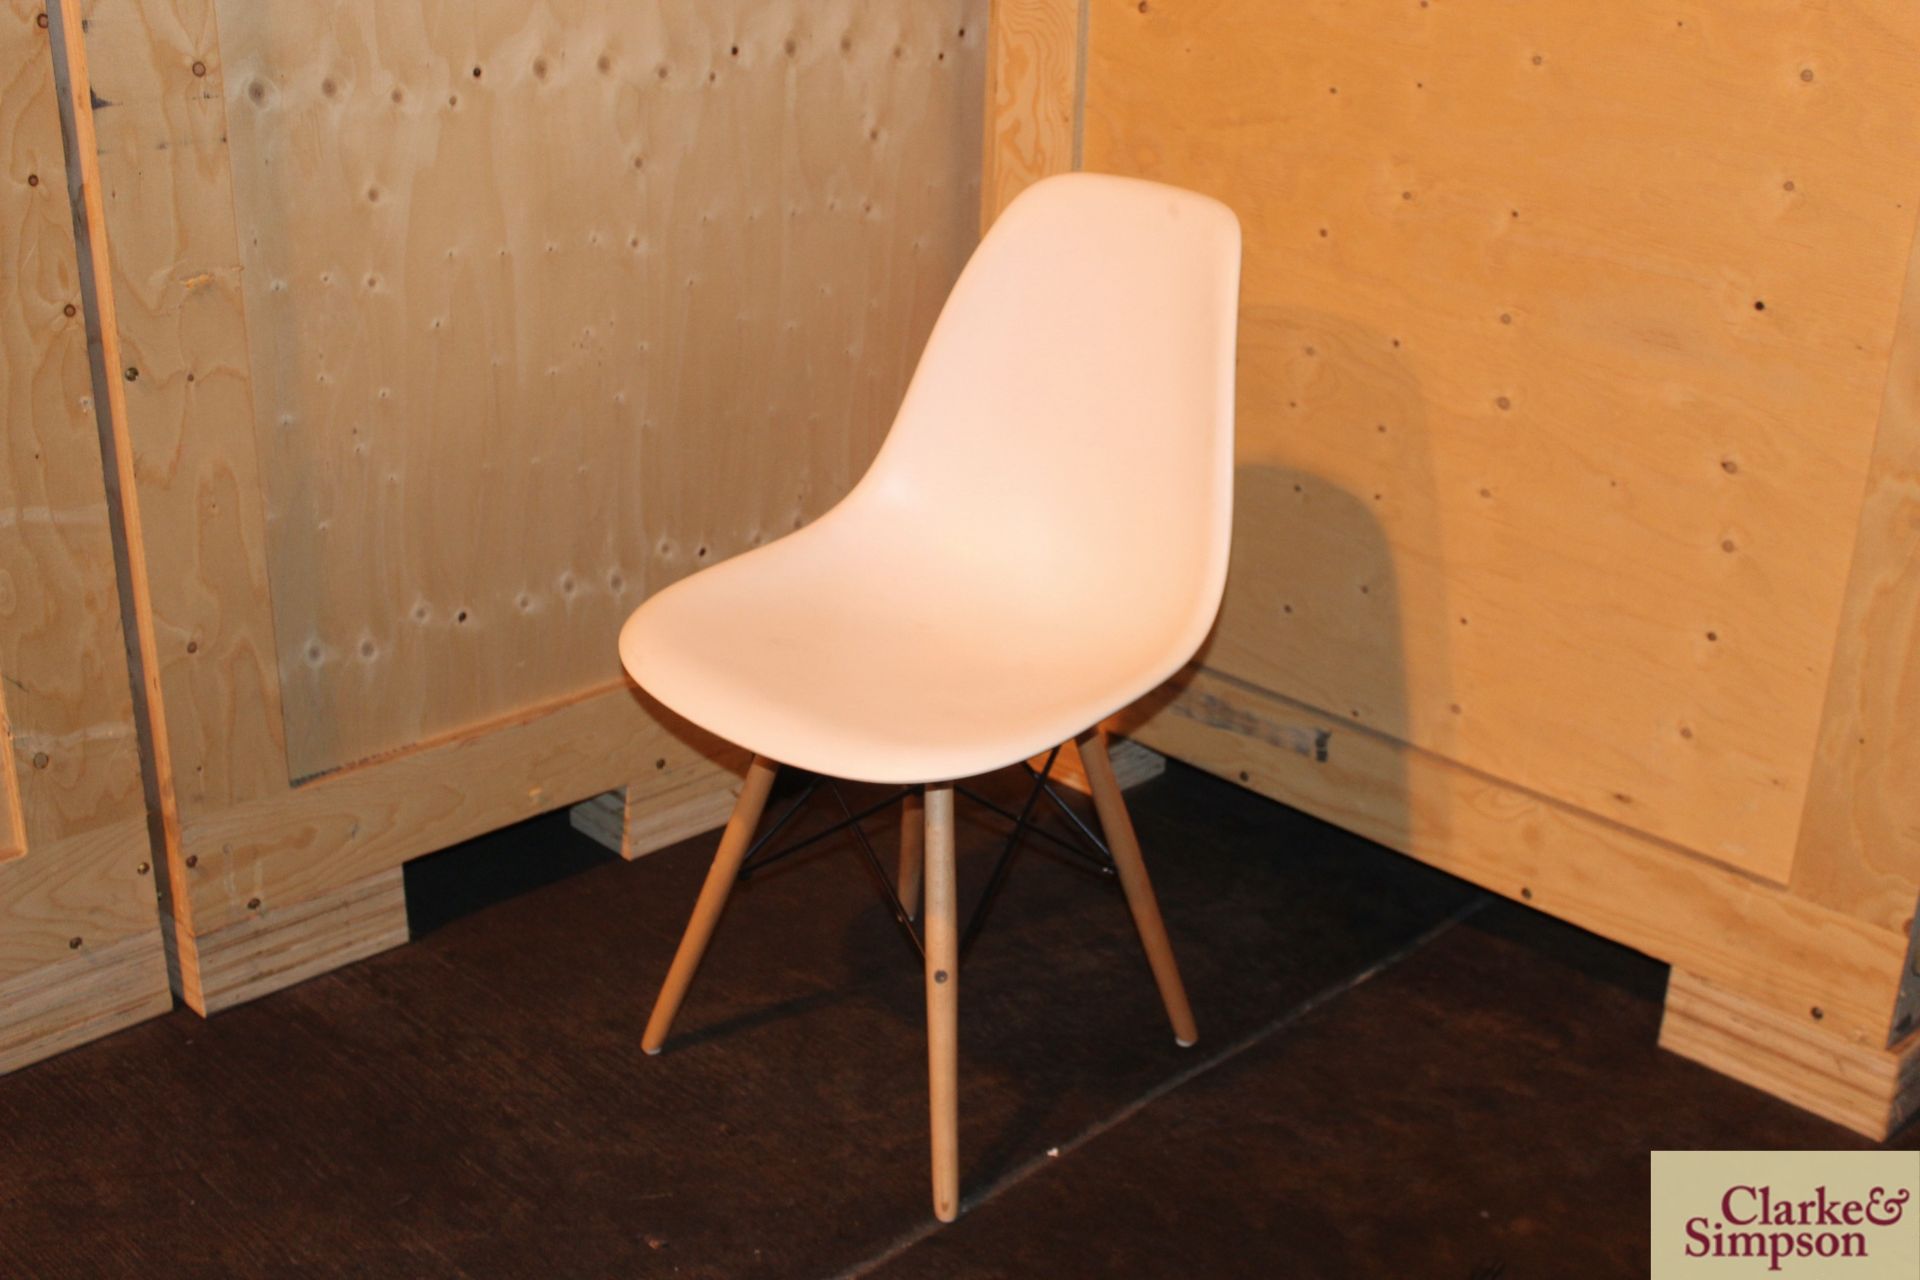 c.70x Eames style plastic side chairs with bases and some fixings. - Image 5 of 6